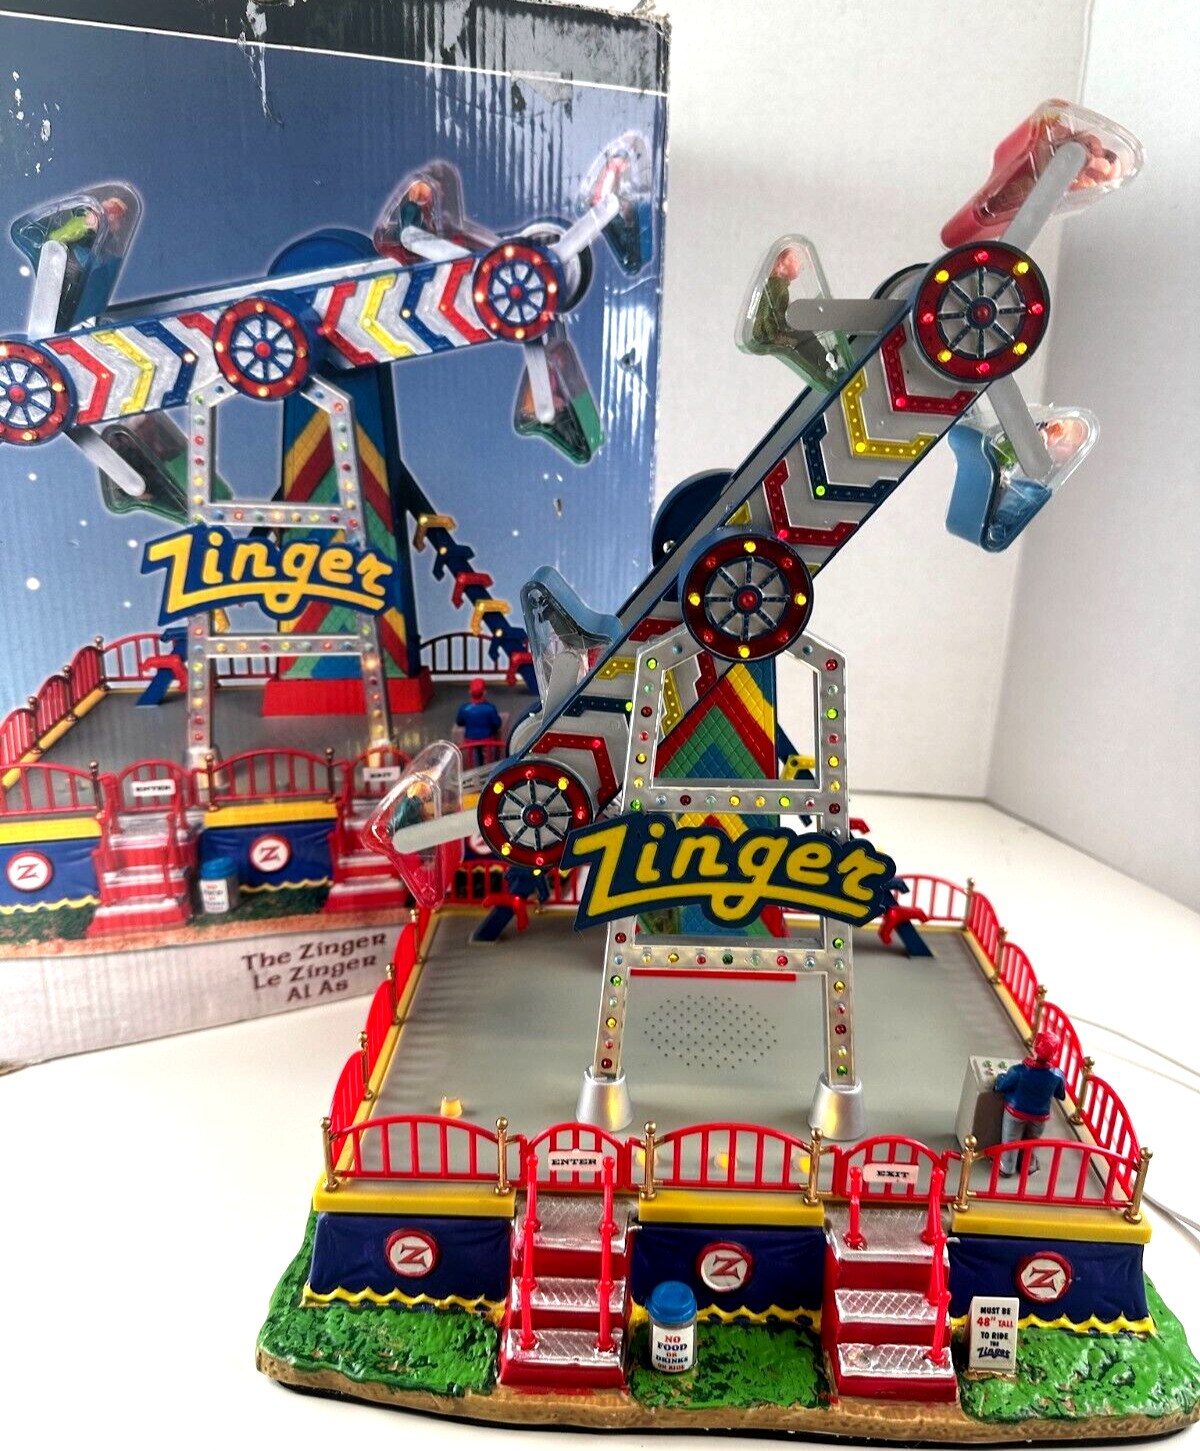 LEMAX Carole Towne THE ZINGER Animated Holiday Village Carnival Lights & Sound 